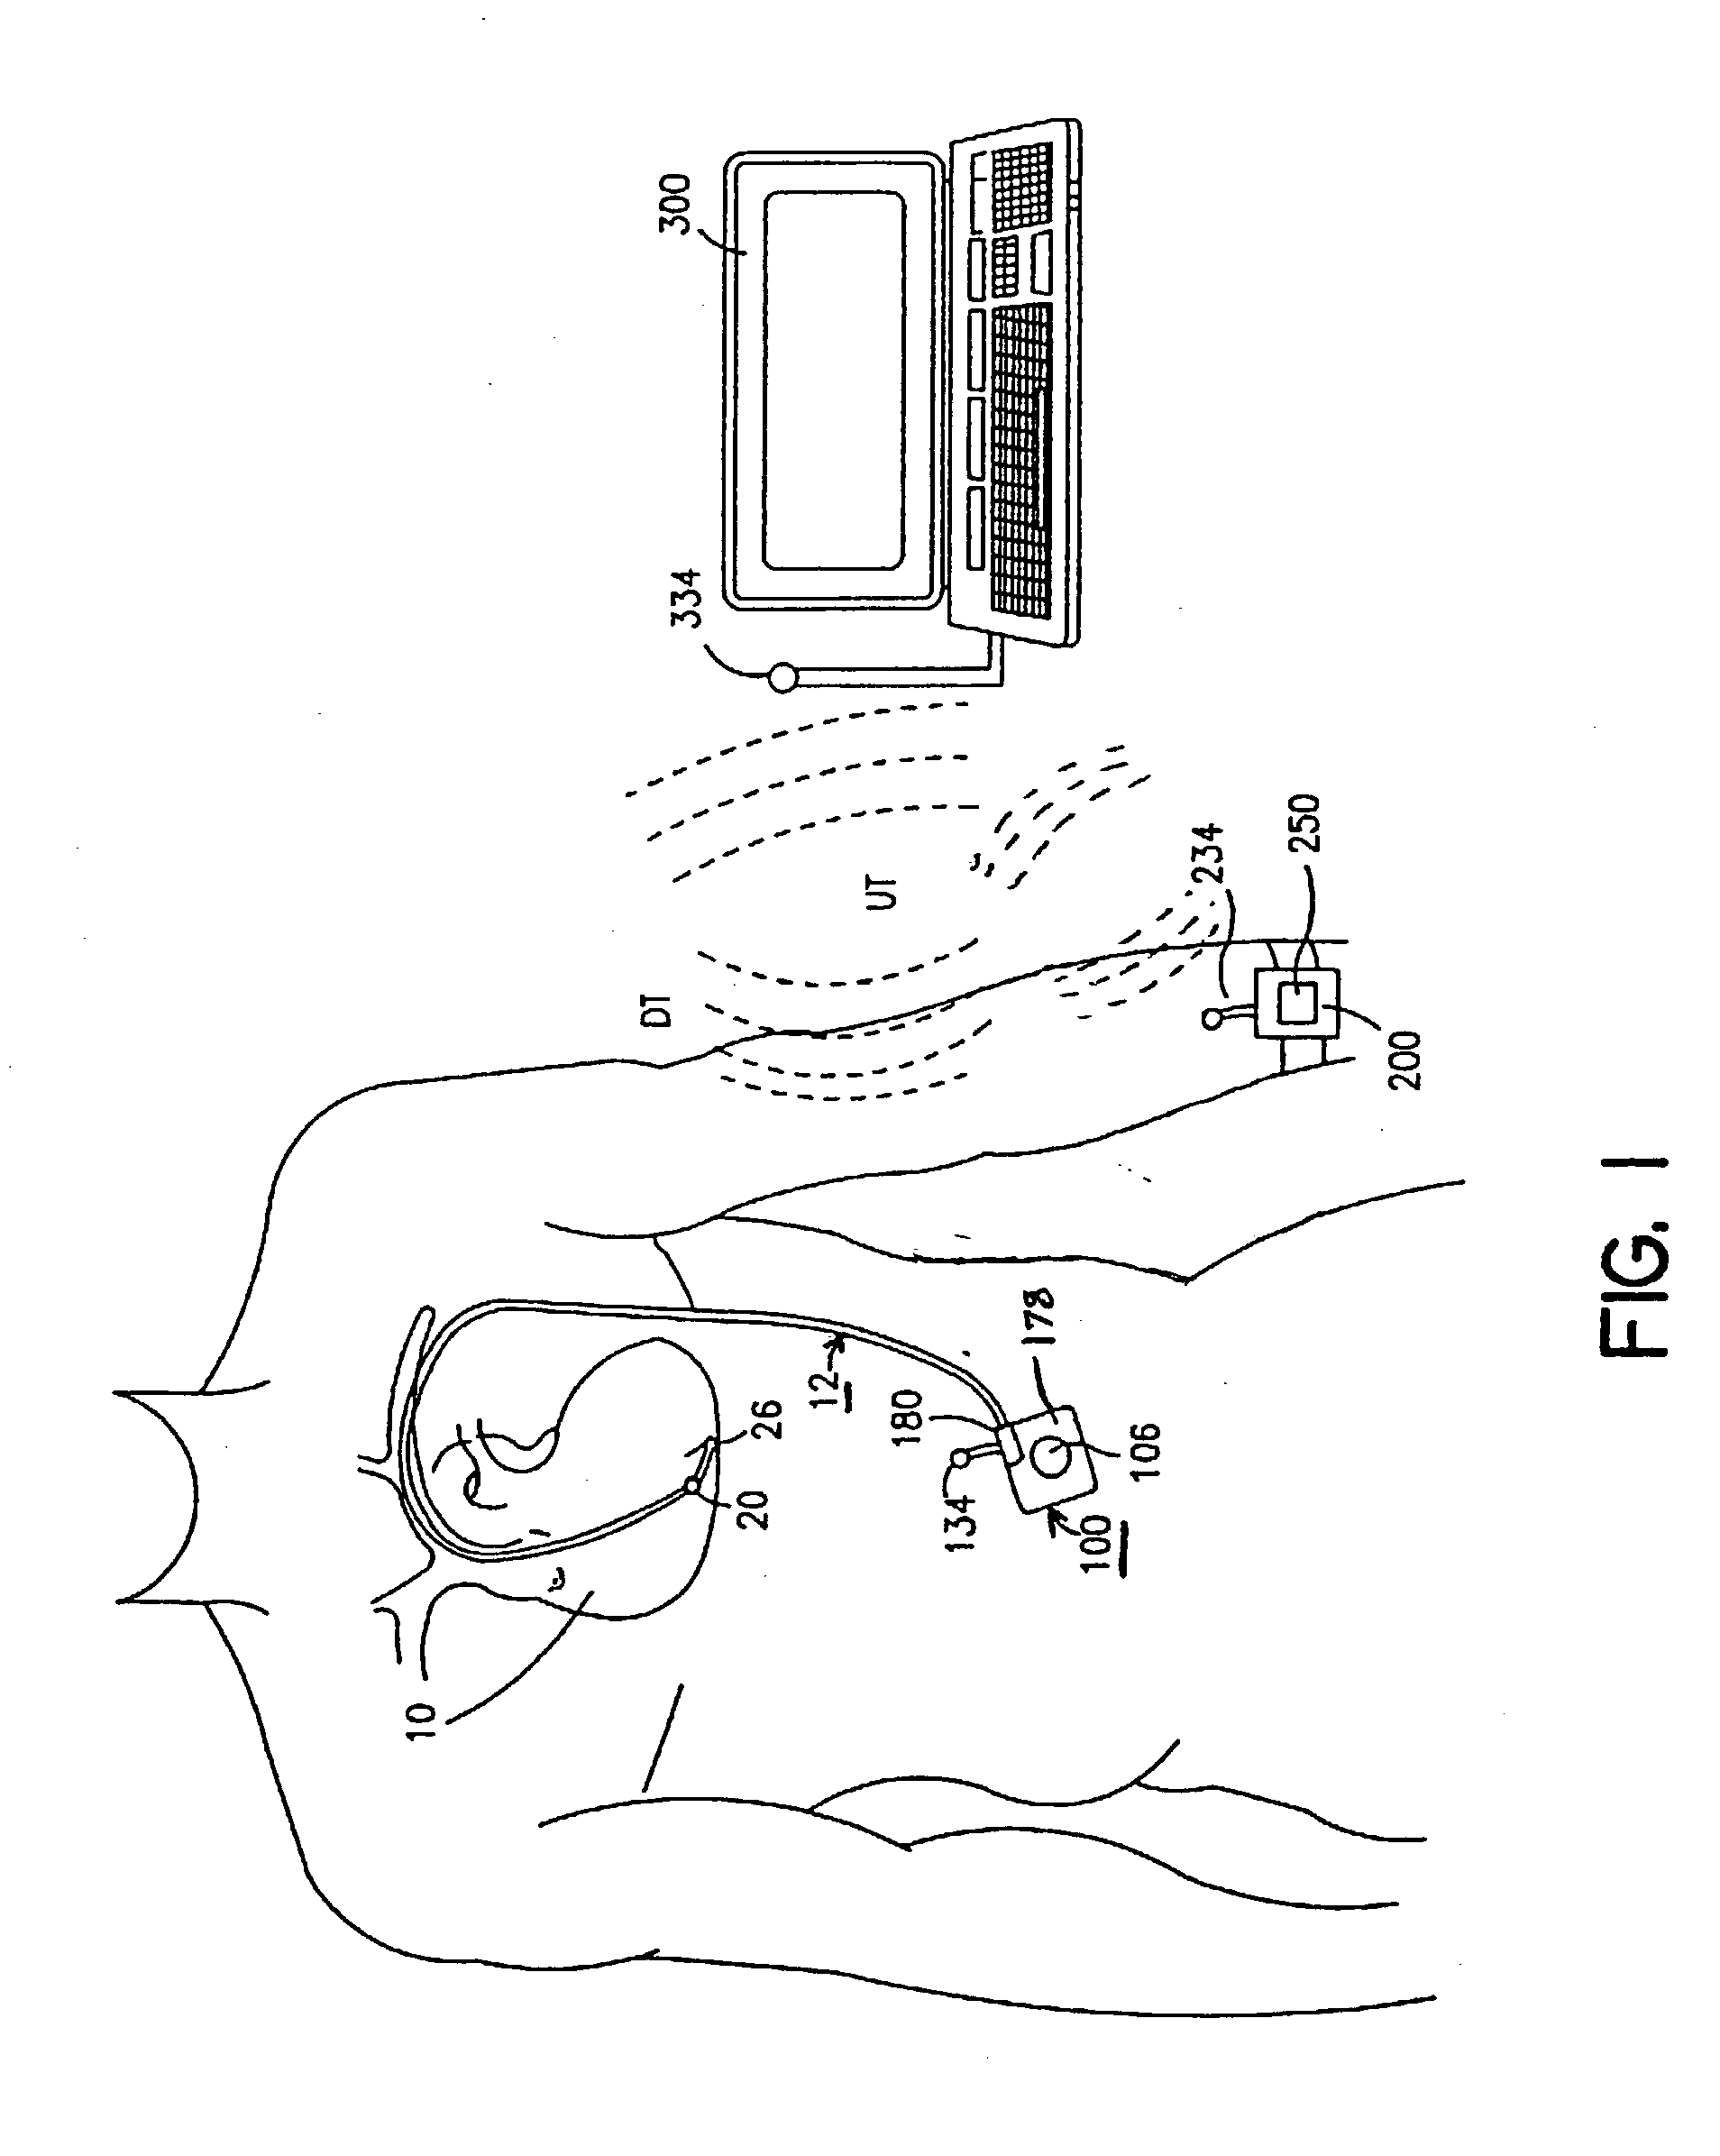 Methods and apparatus for estimation of ventricular afterload based on ventricular pressure measurements